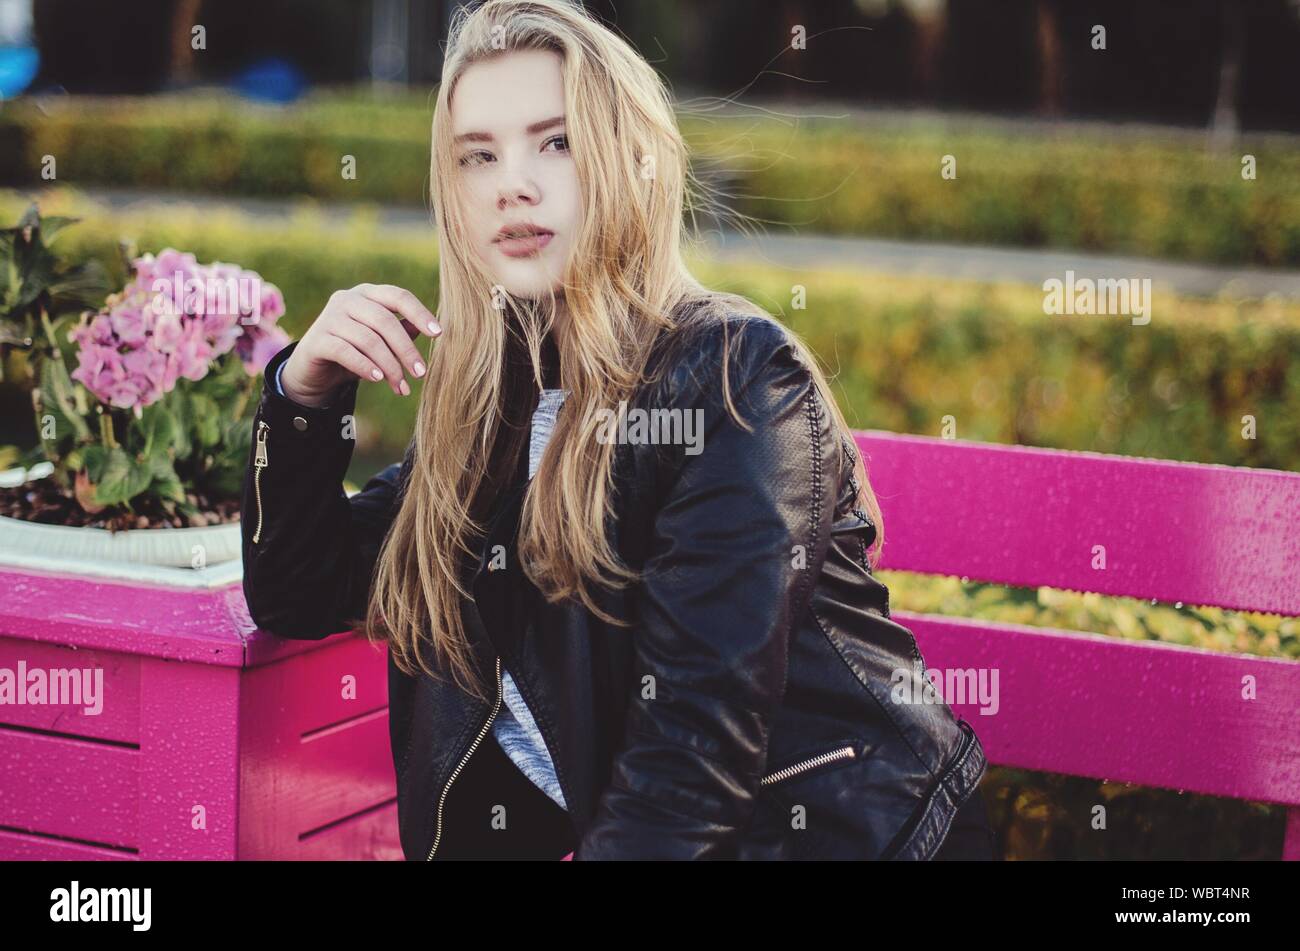 Portrait Of Woman On Pink Bench Stock Photo